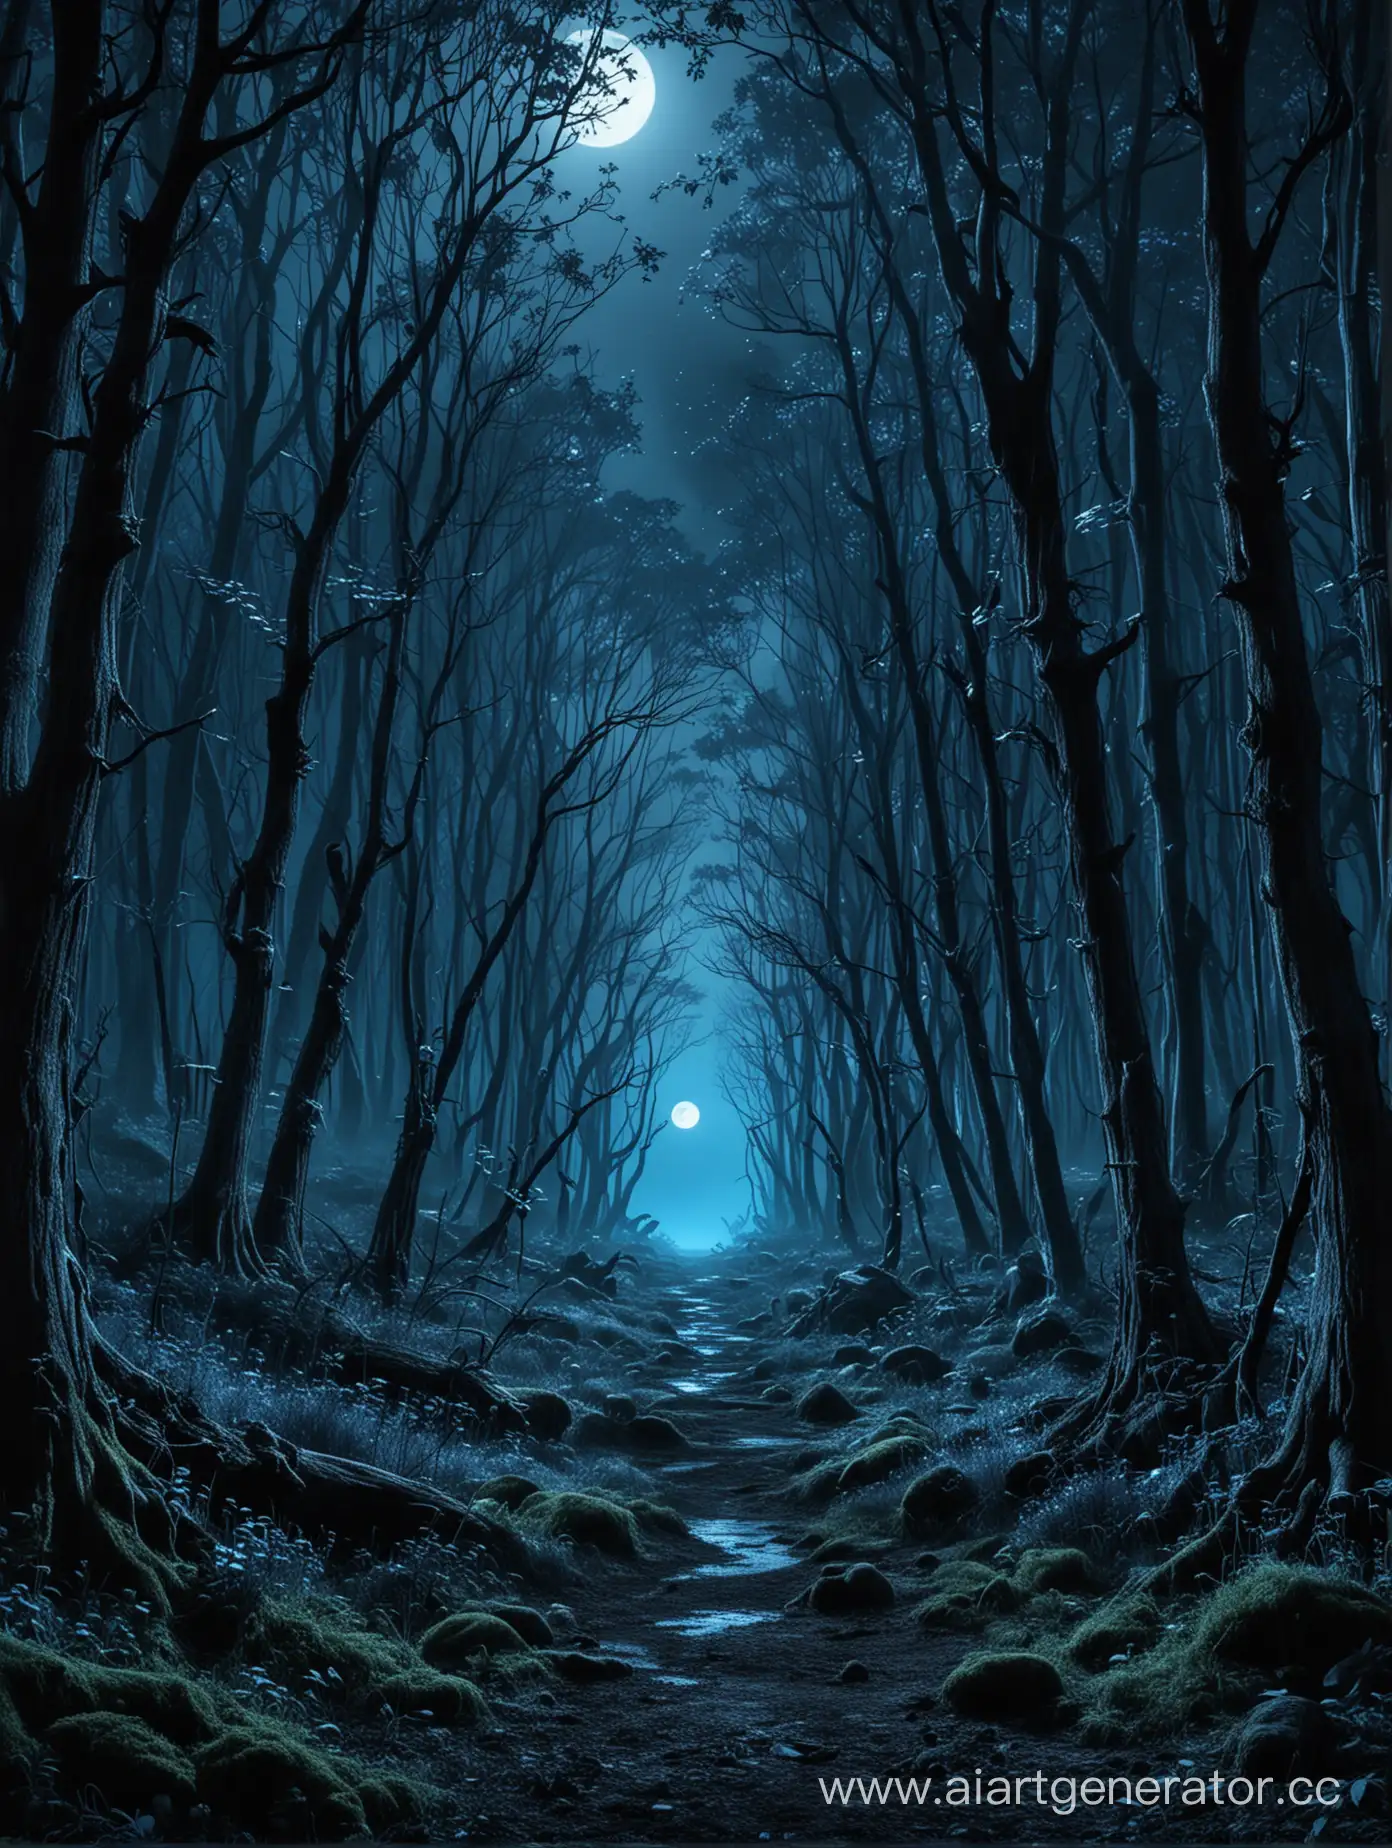 Enchanting-Night-Fairy-Forest-Scene-Inspired-by-Maleficent-in-Blue-Tones